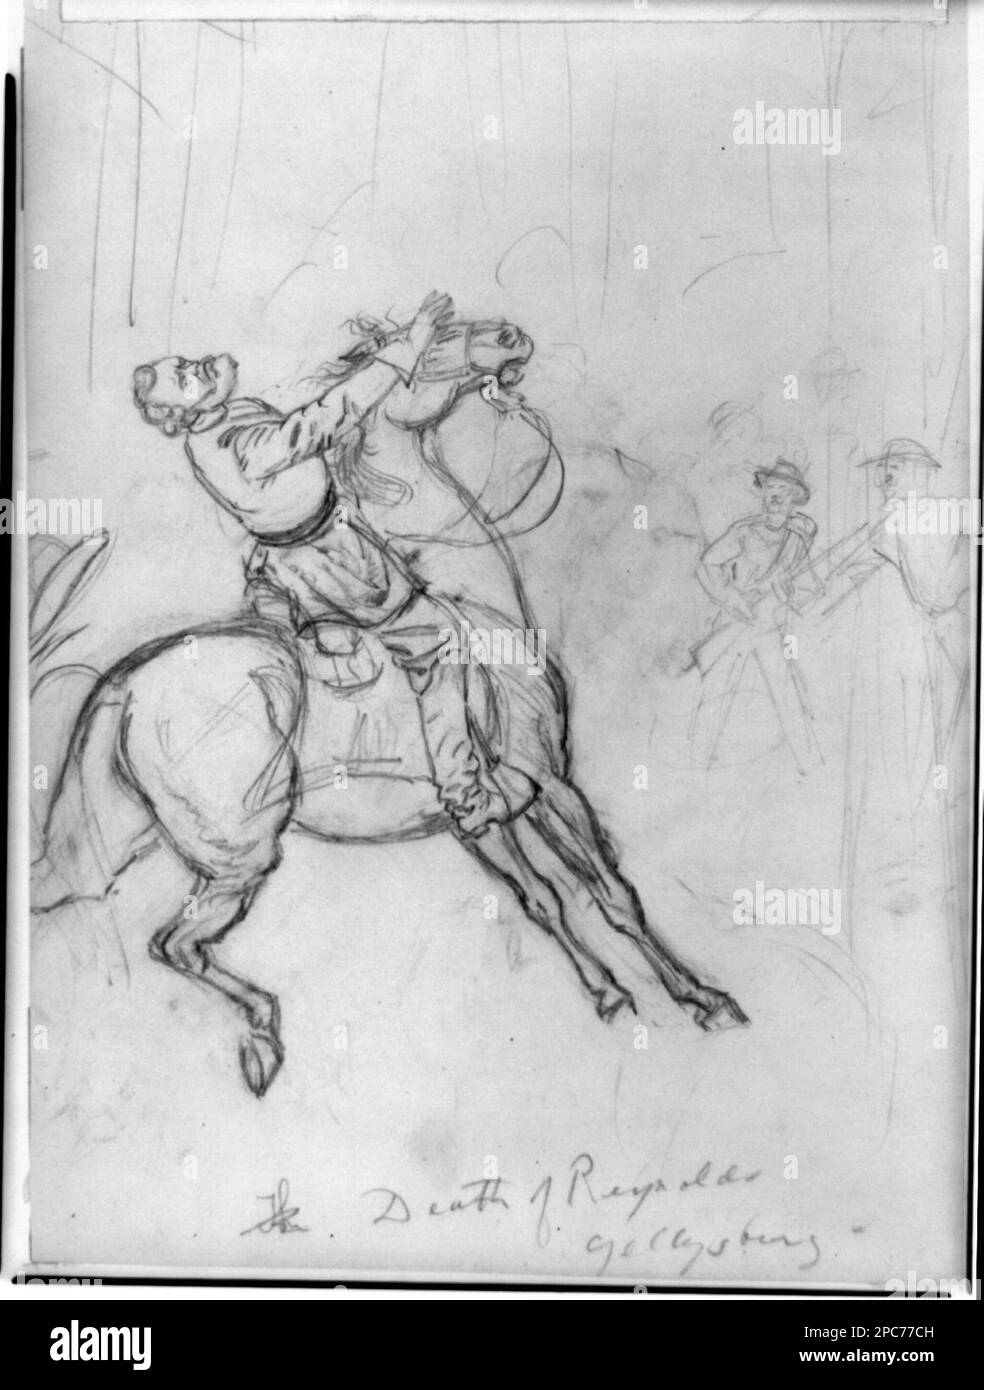 The death of Reynolds Gettysburg. Morgan collection of Civil War drawings. Reynolds, John Fulton, 1820-1863, Death & burial, Gettysburg, Battle of, Gettysburg, Pa, 1863, Military officers, Union, 1860-1870, Soldiers, Union, 1860-1870, United States, History, Civil War, 1861-1865, Campaigns & battles, United States, Pennsylvania, Gettysburg Stock Photo